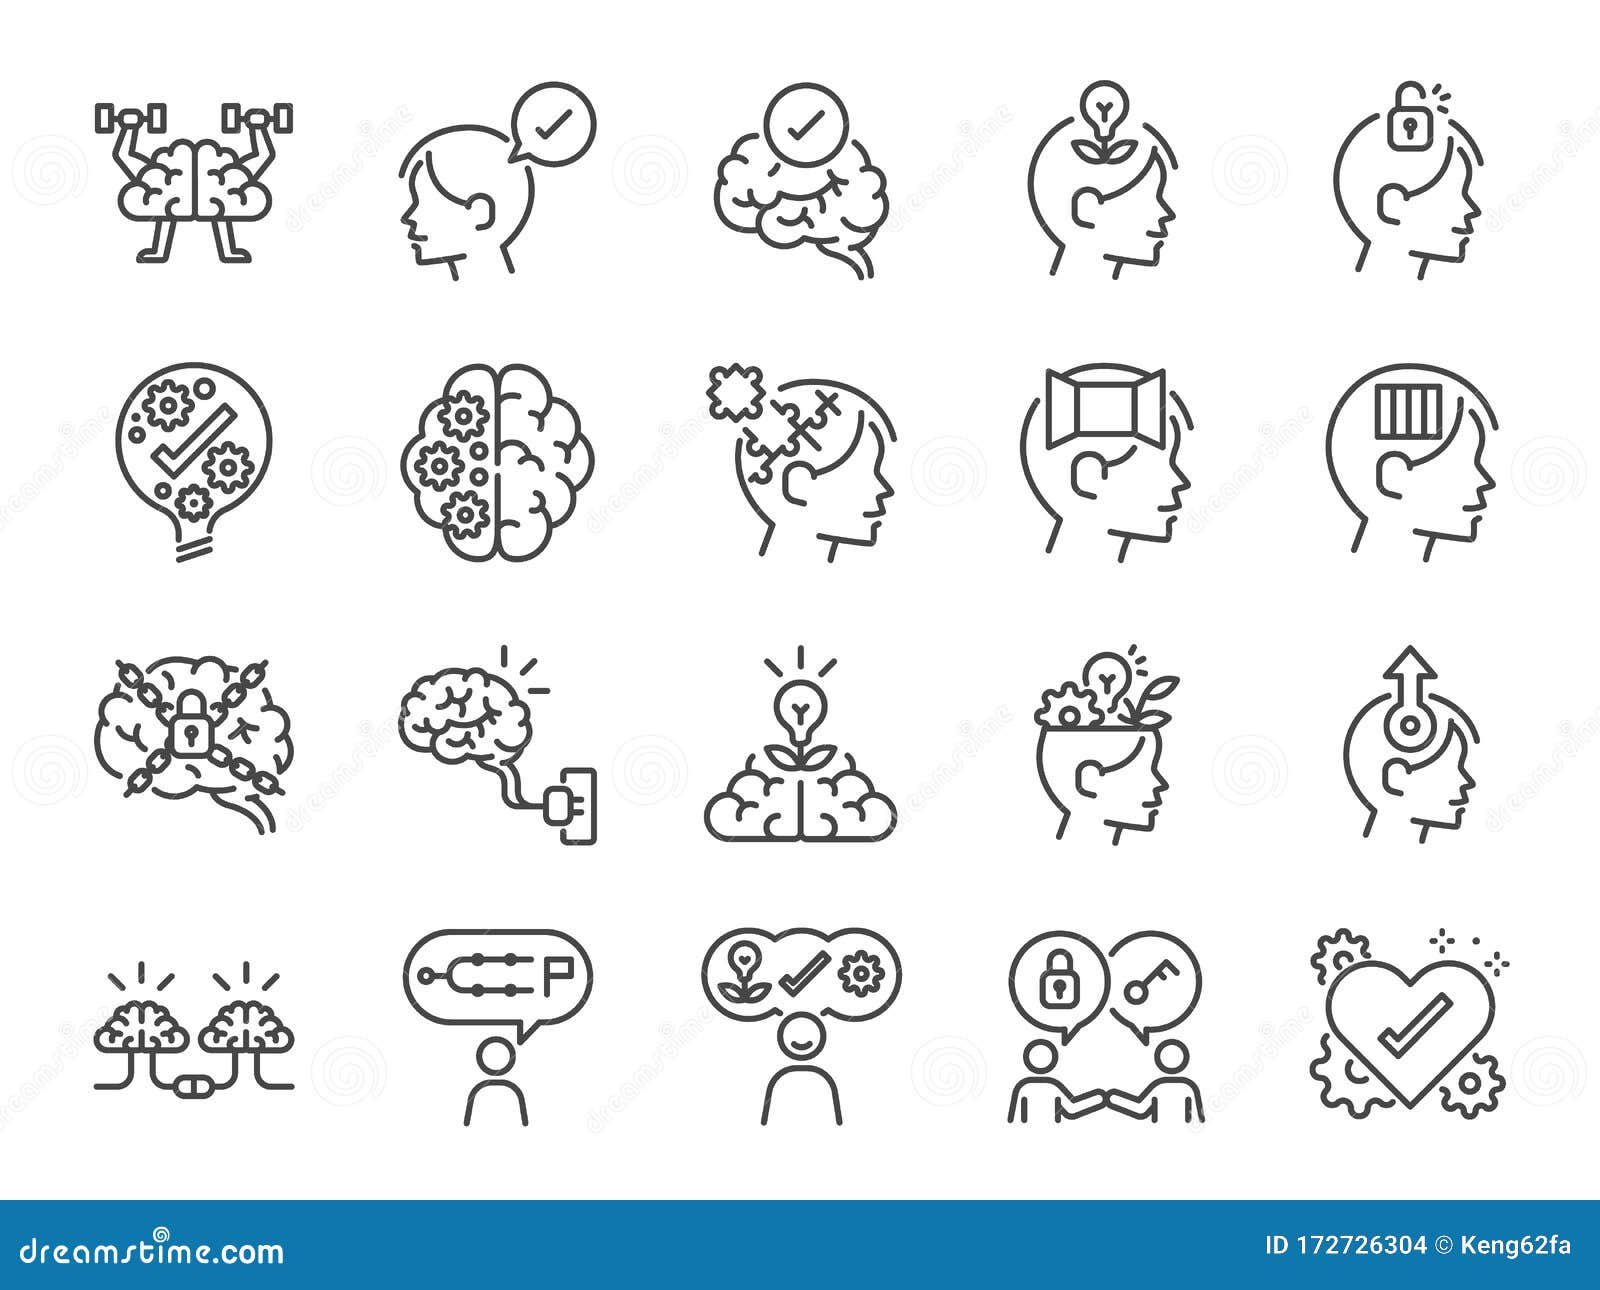 mindset icon set. included icons as idea, think, creative, brain, moral,ÃÂ mind, kindness and more.